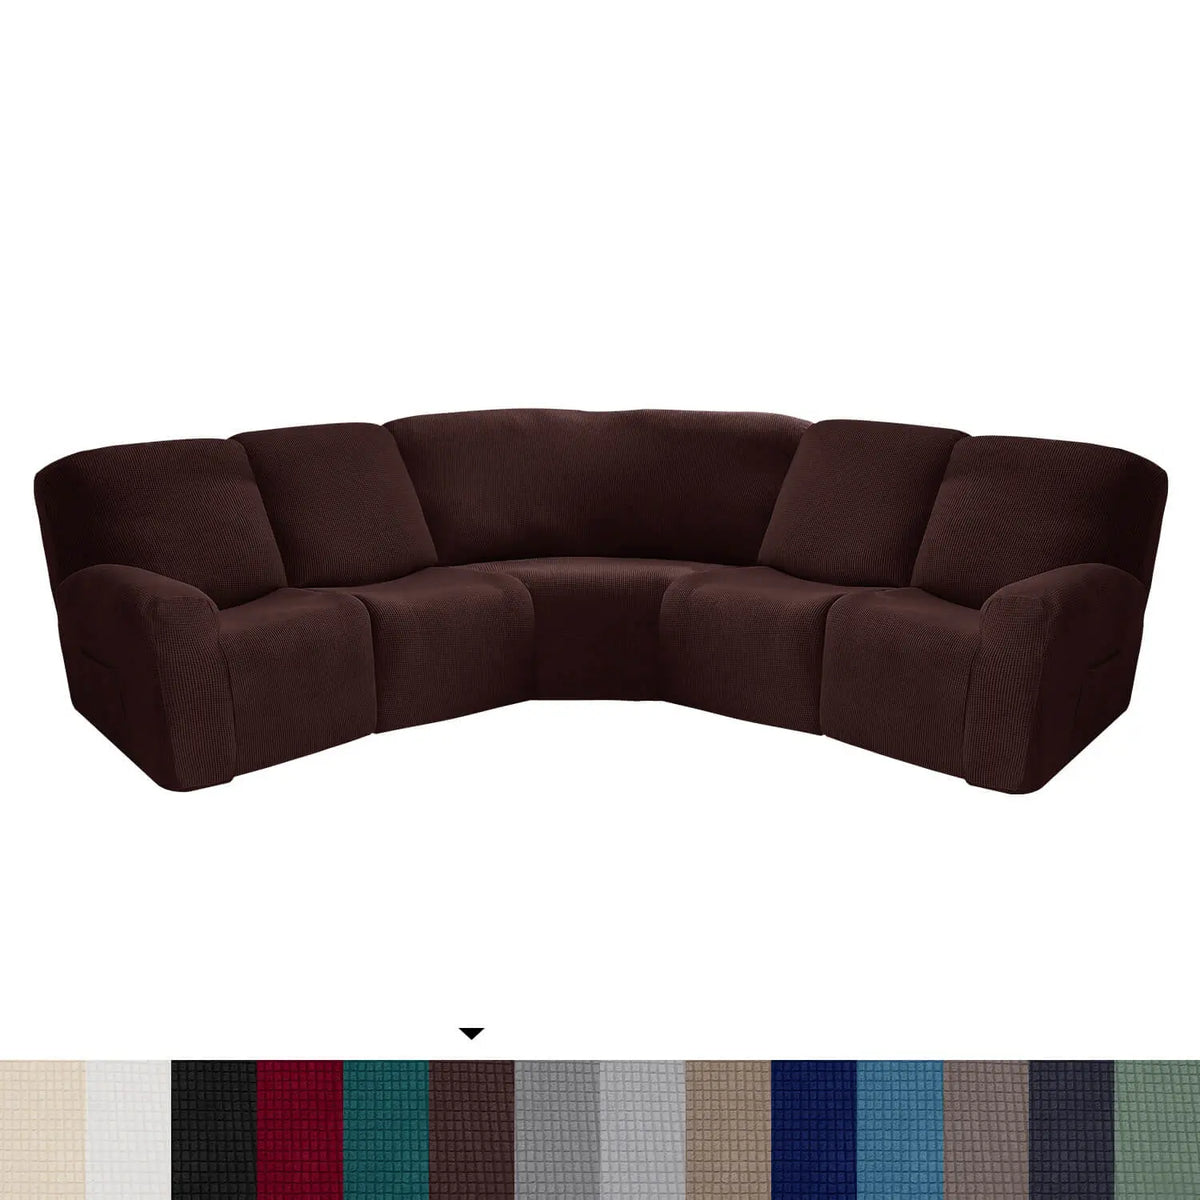 Crfatop L Shape Sectional Recliner Sofa Covers Corner Couch Covers Brown